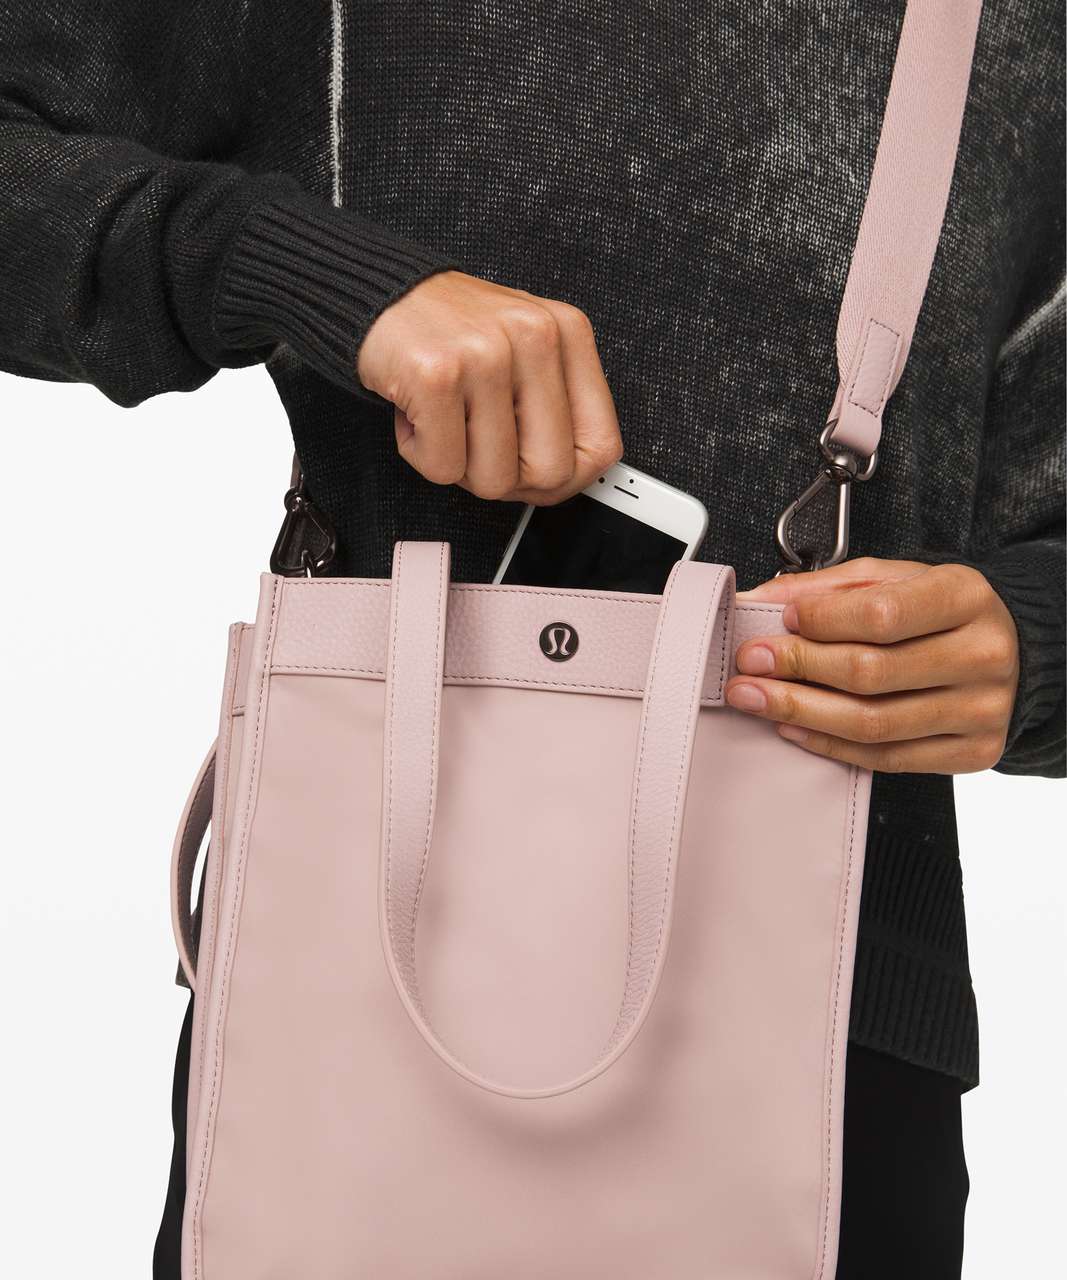 lululemon Tote Review: Now and Always Mini Tote - Schimiggy Reviews